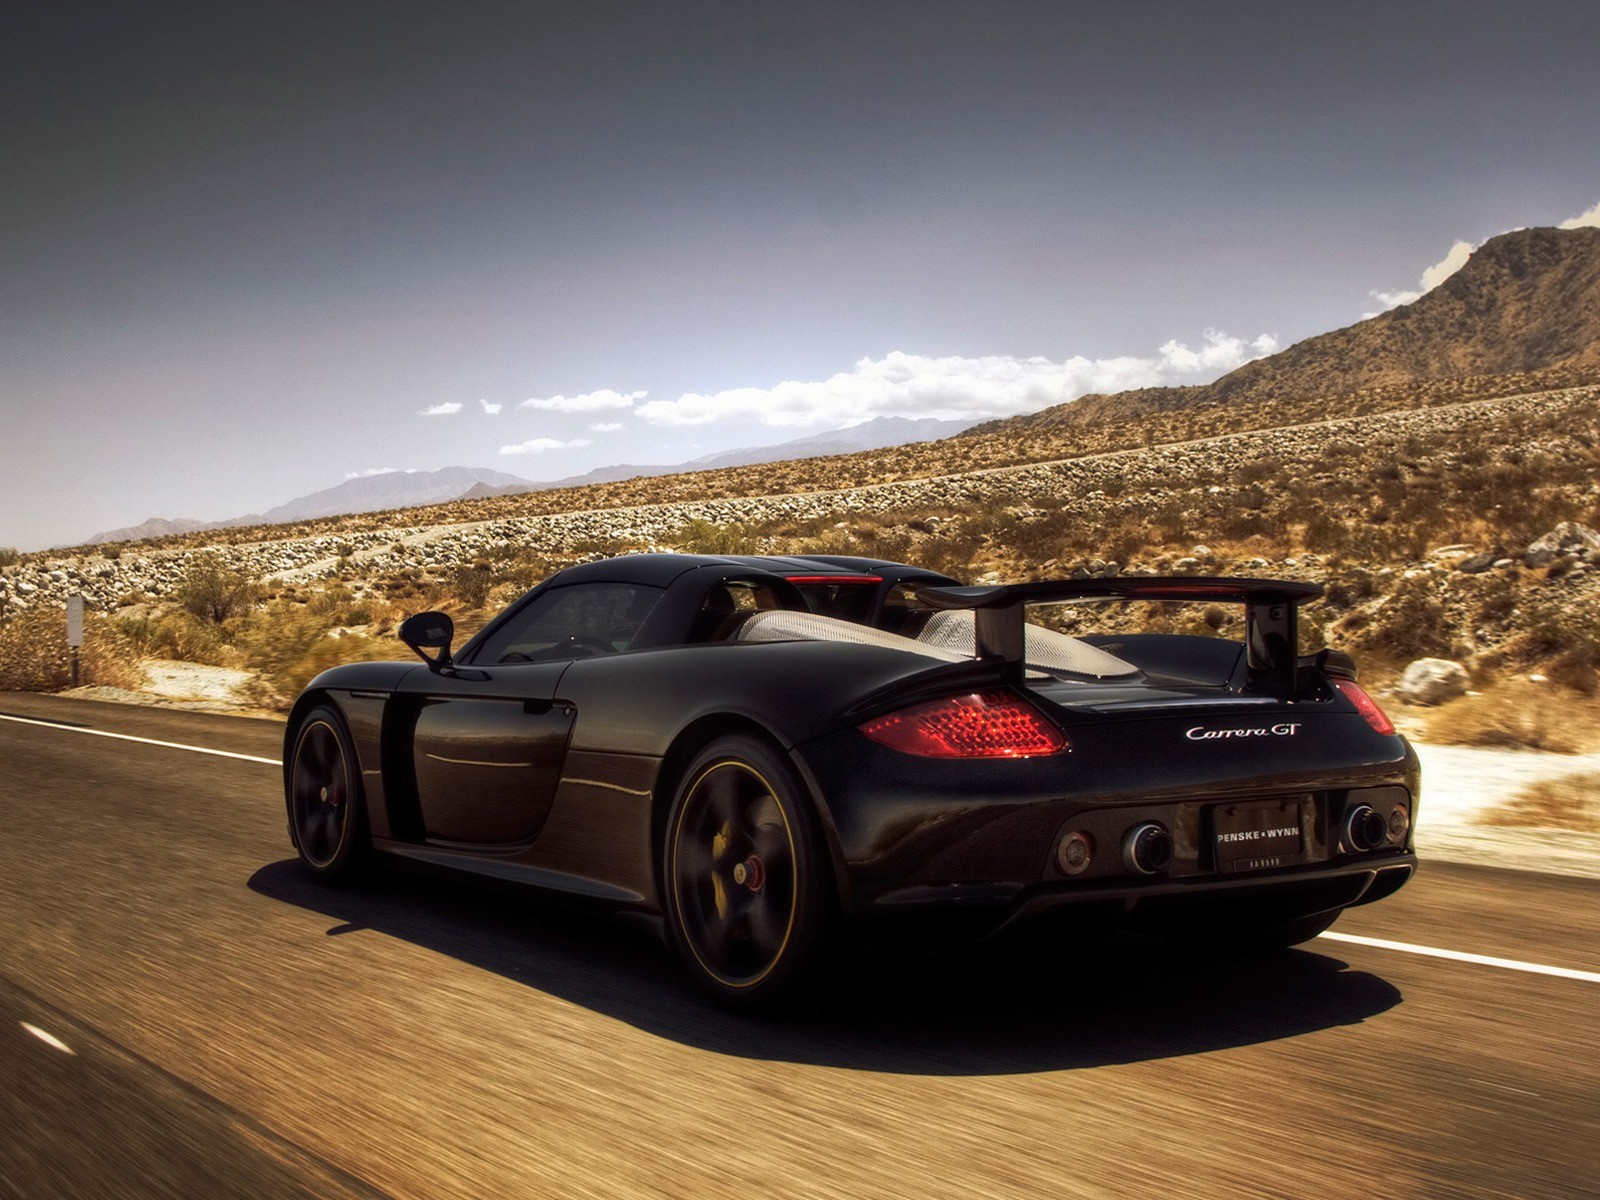 Porsche Carrera GT with straight pipes = BRUTAL Sound! [HD video]